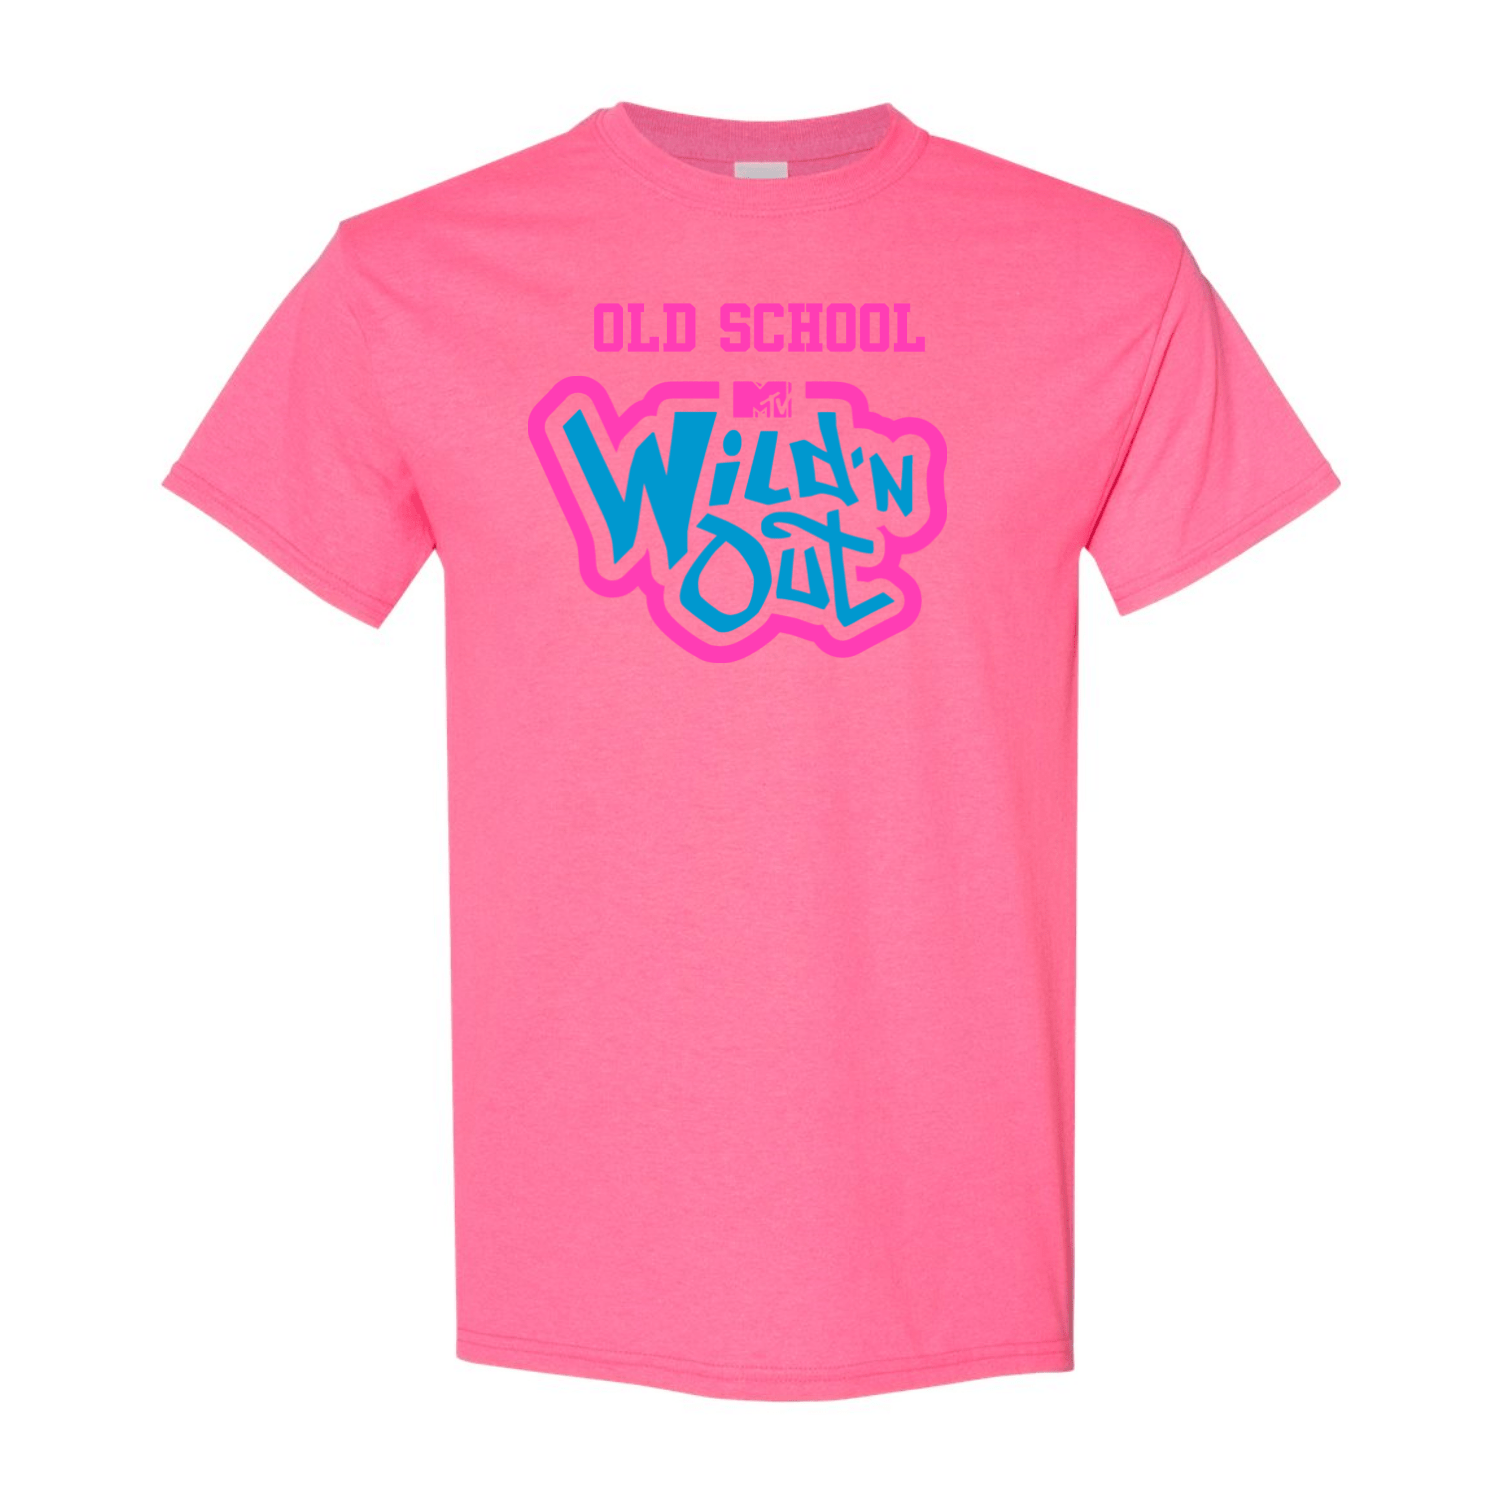 Wild 'N Out Neon Pink Old School Adult Short Sleeve T - Shirt - Paramount Shop